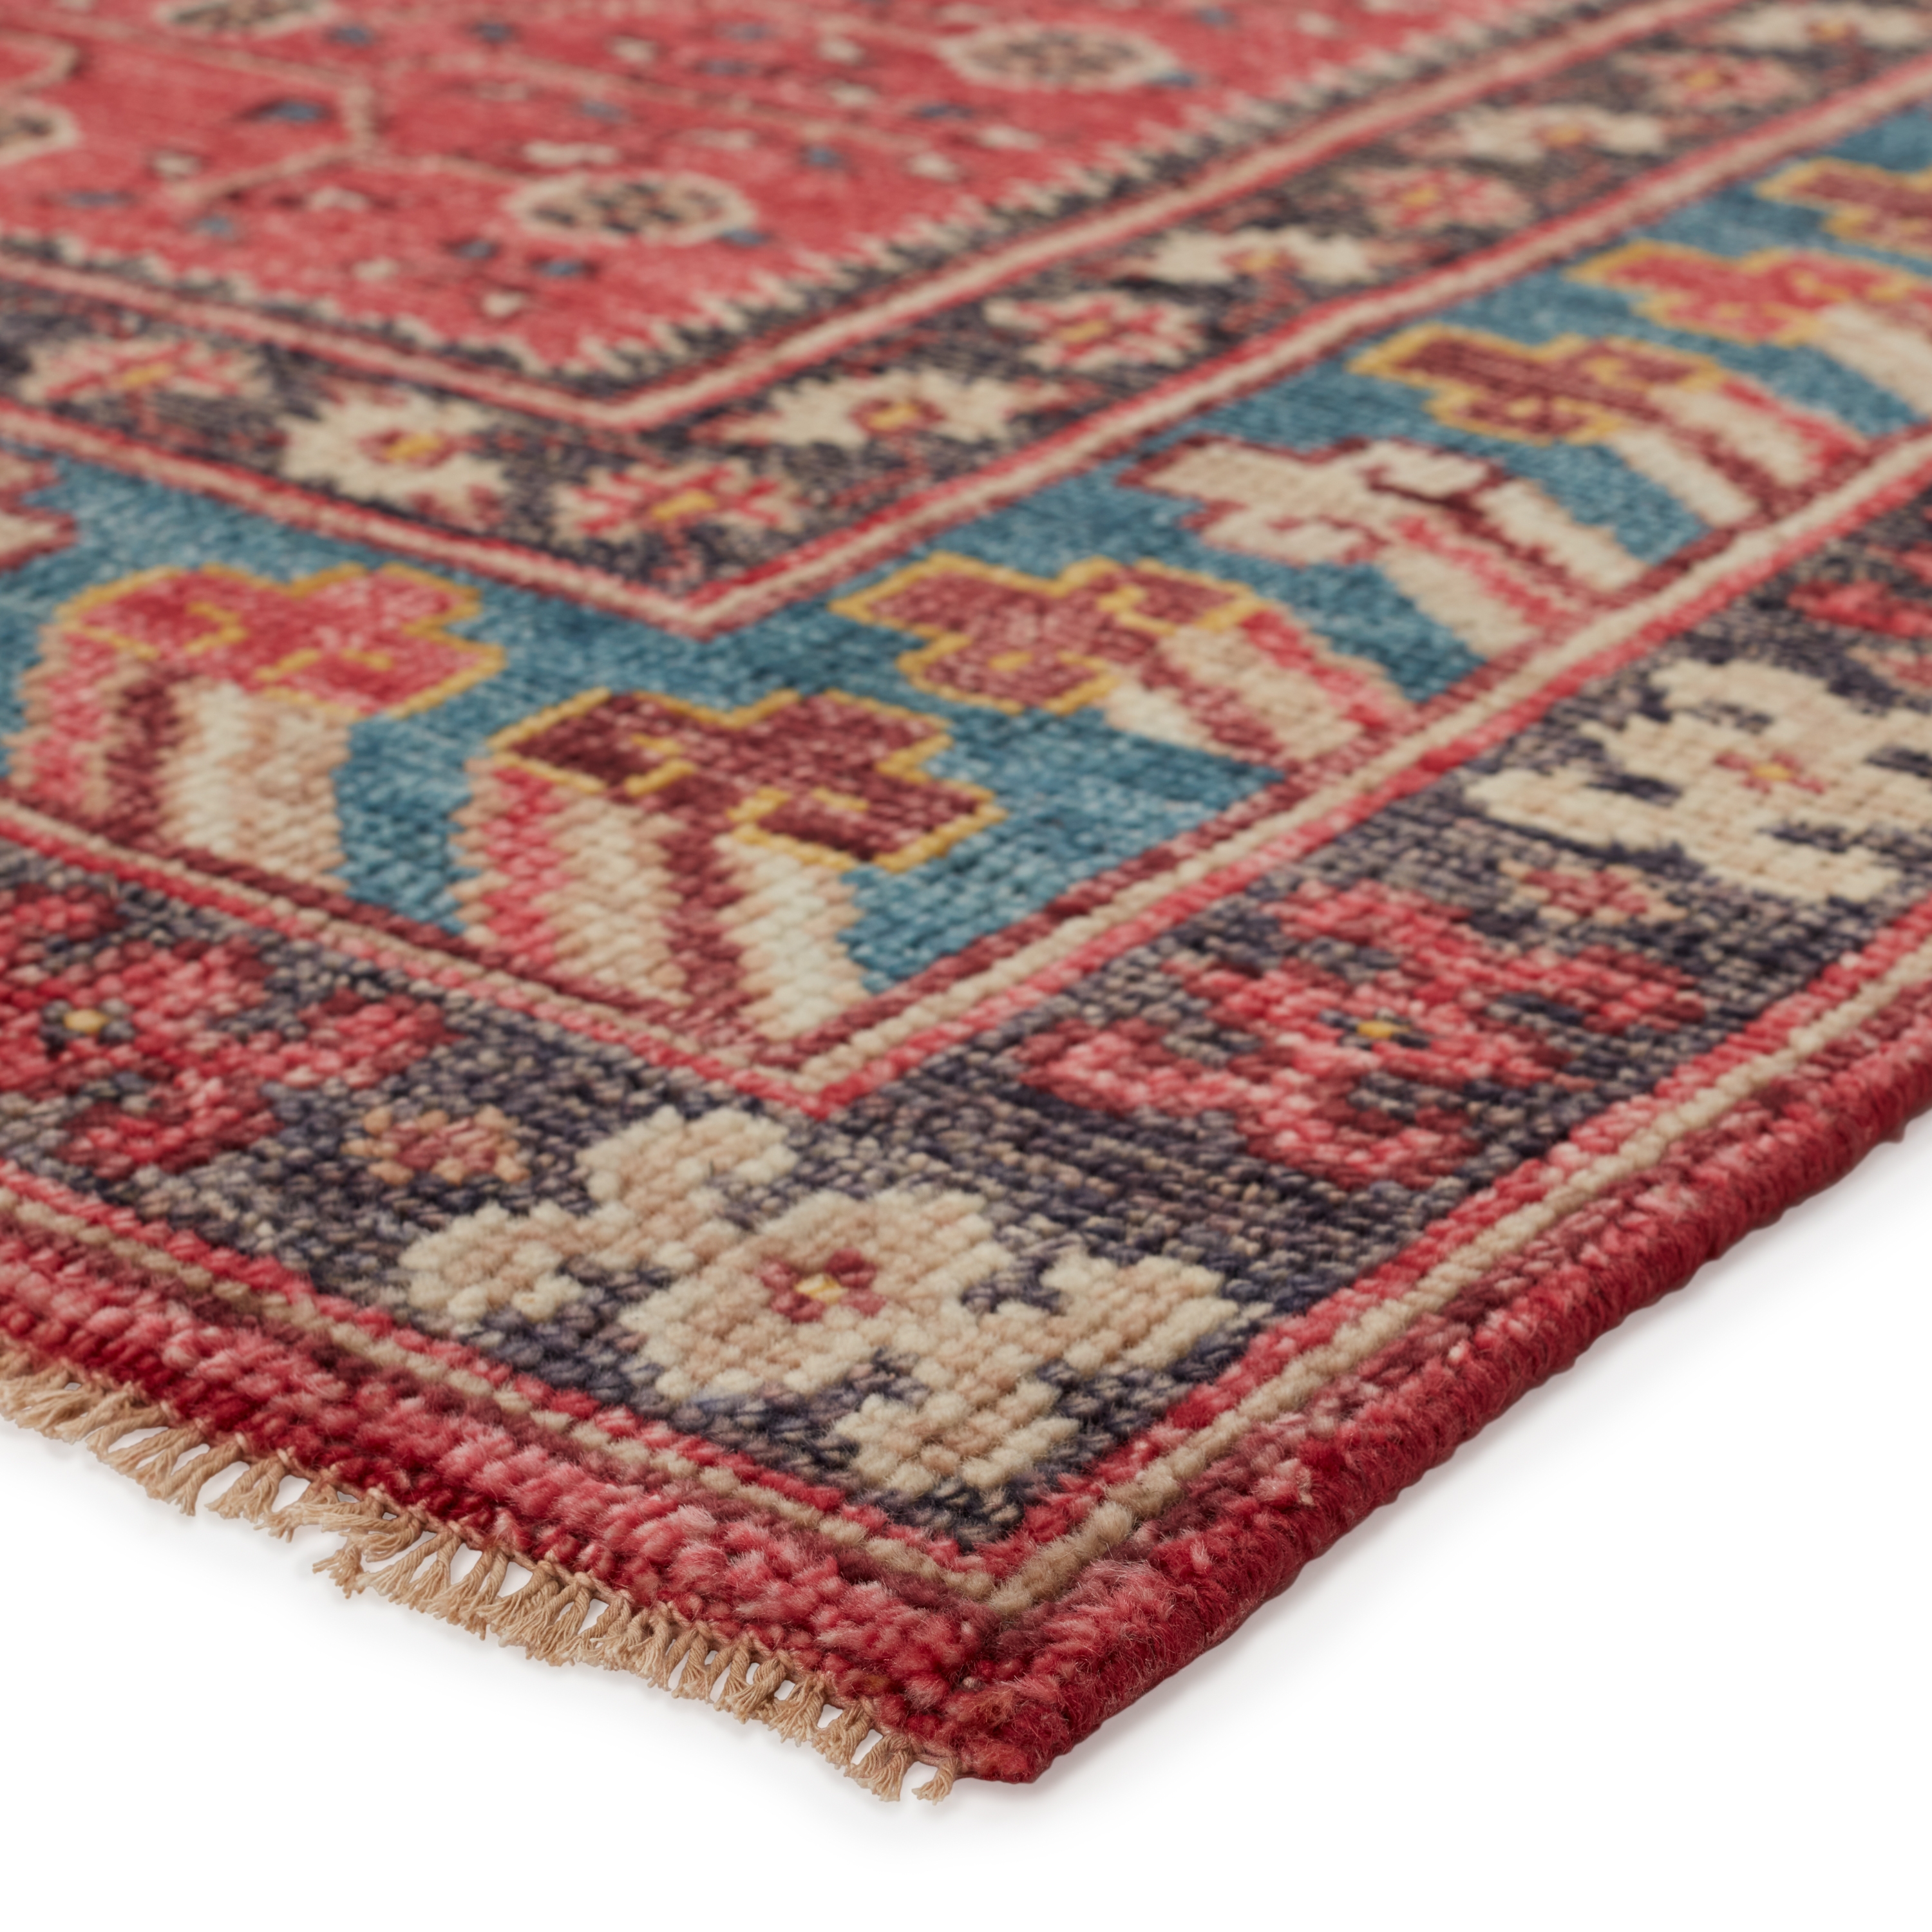 Donte Hand-Knotted Oriental Red/ Blue Area Rug (8'6"X11'6") - Image 1